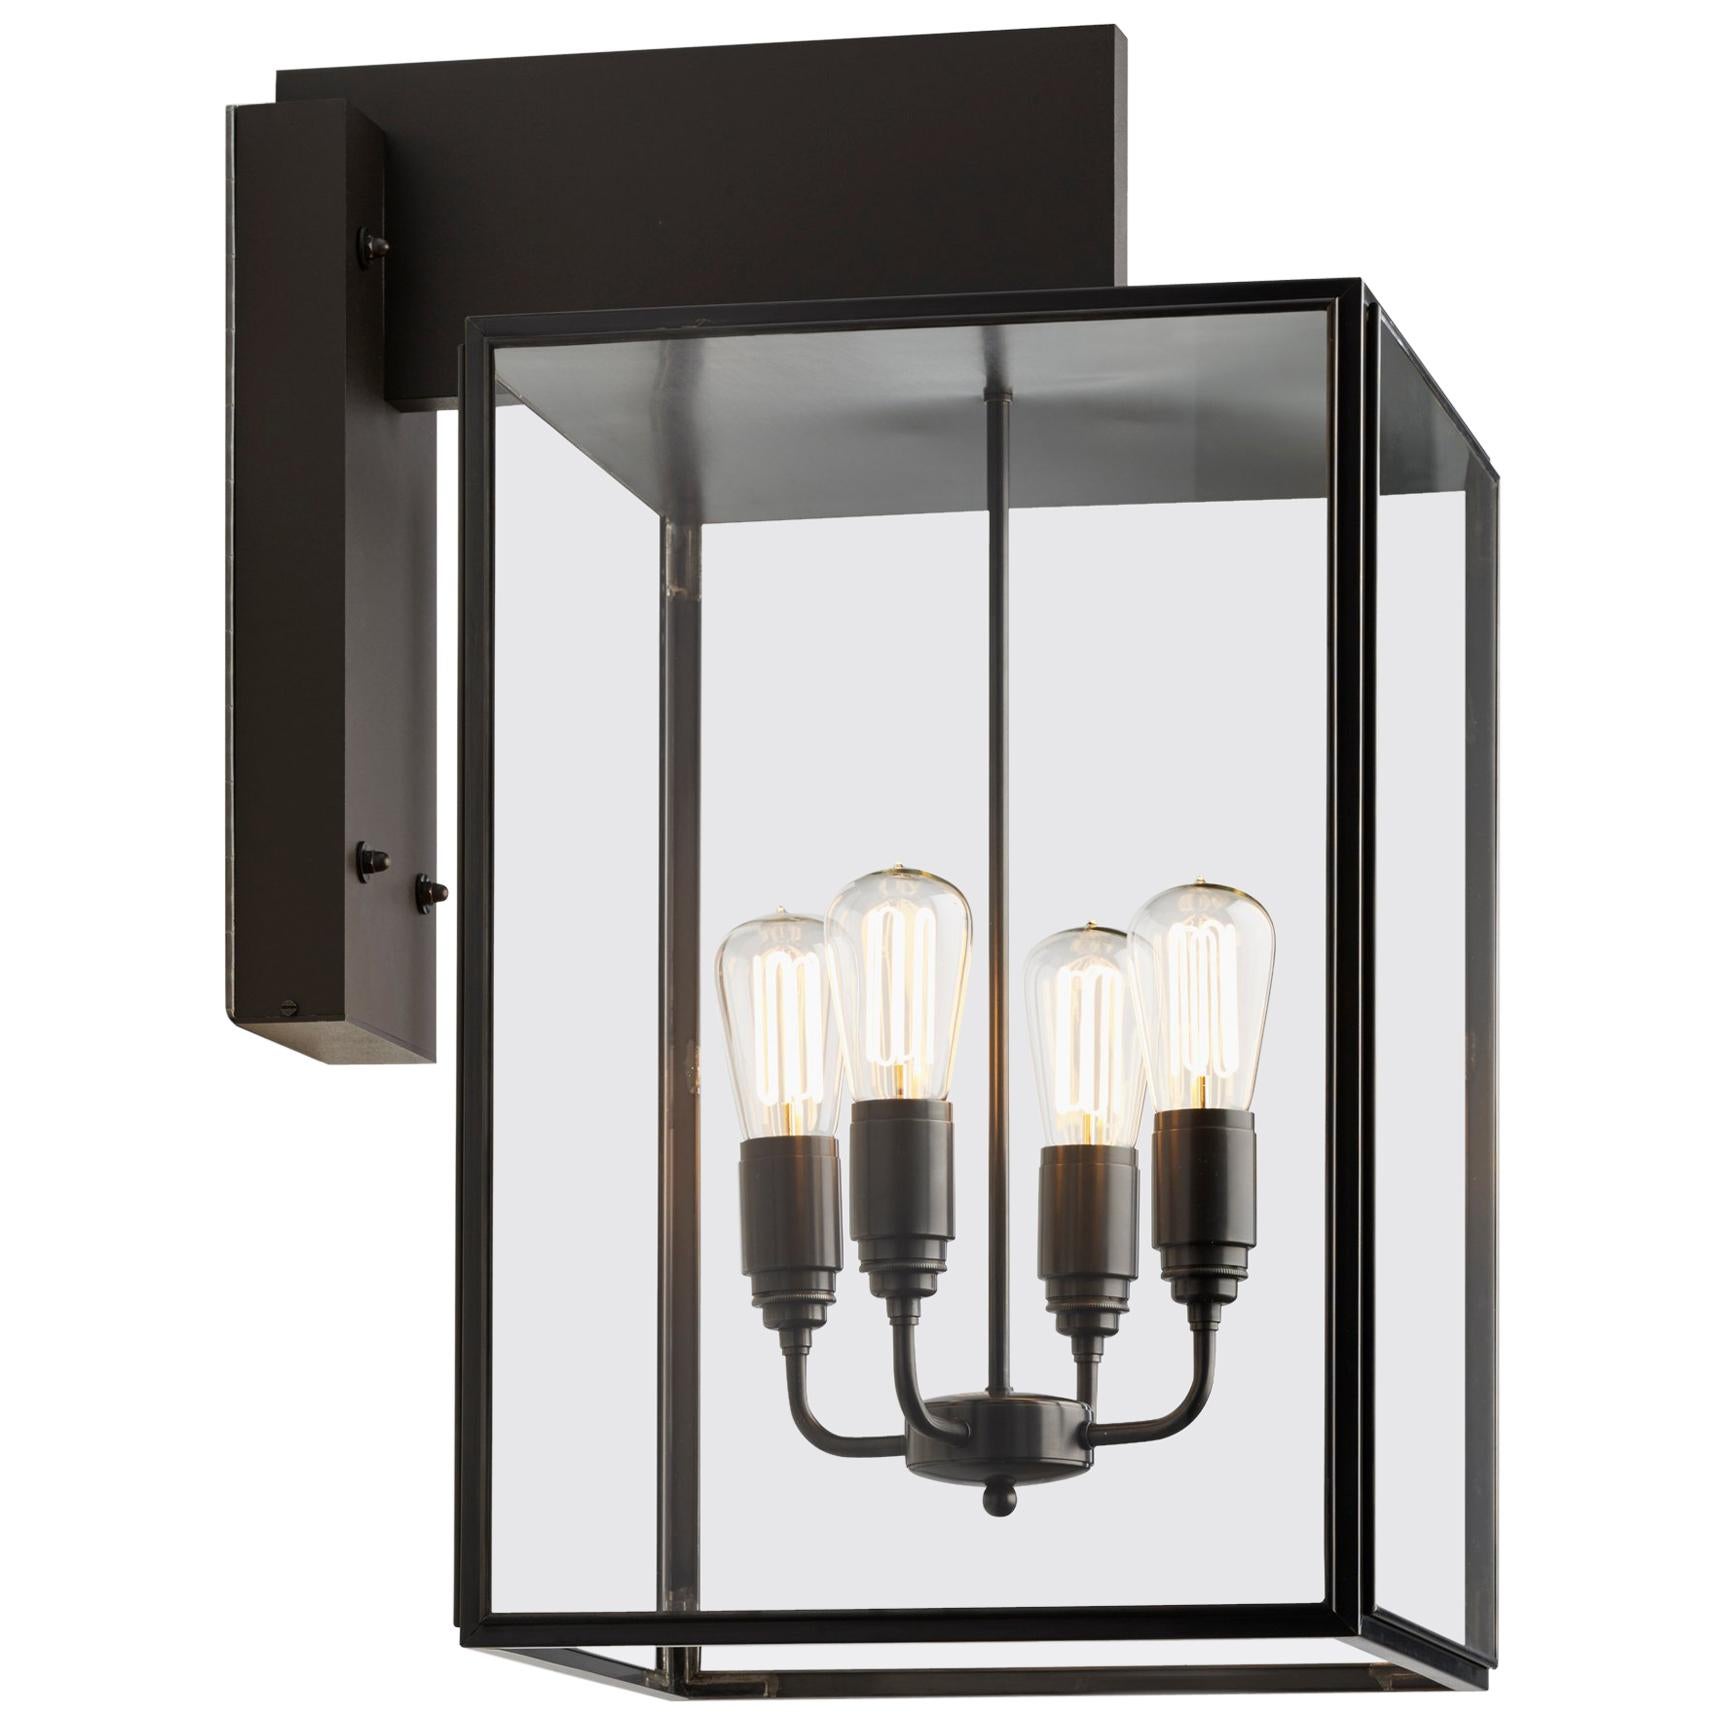 Tekna Ilford Large-C Wall Light with Dark Bronze Finish and Clear Glass